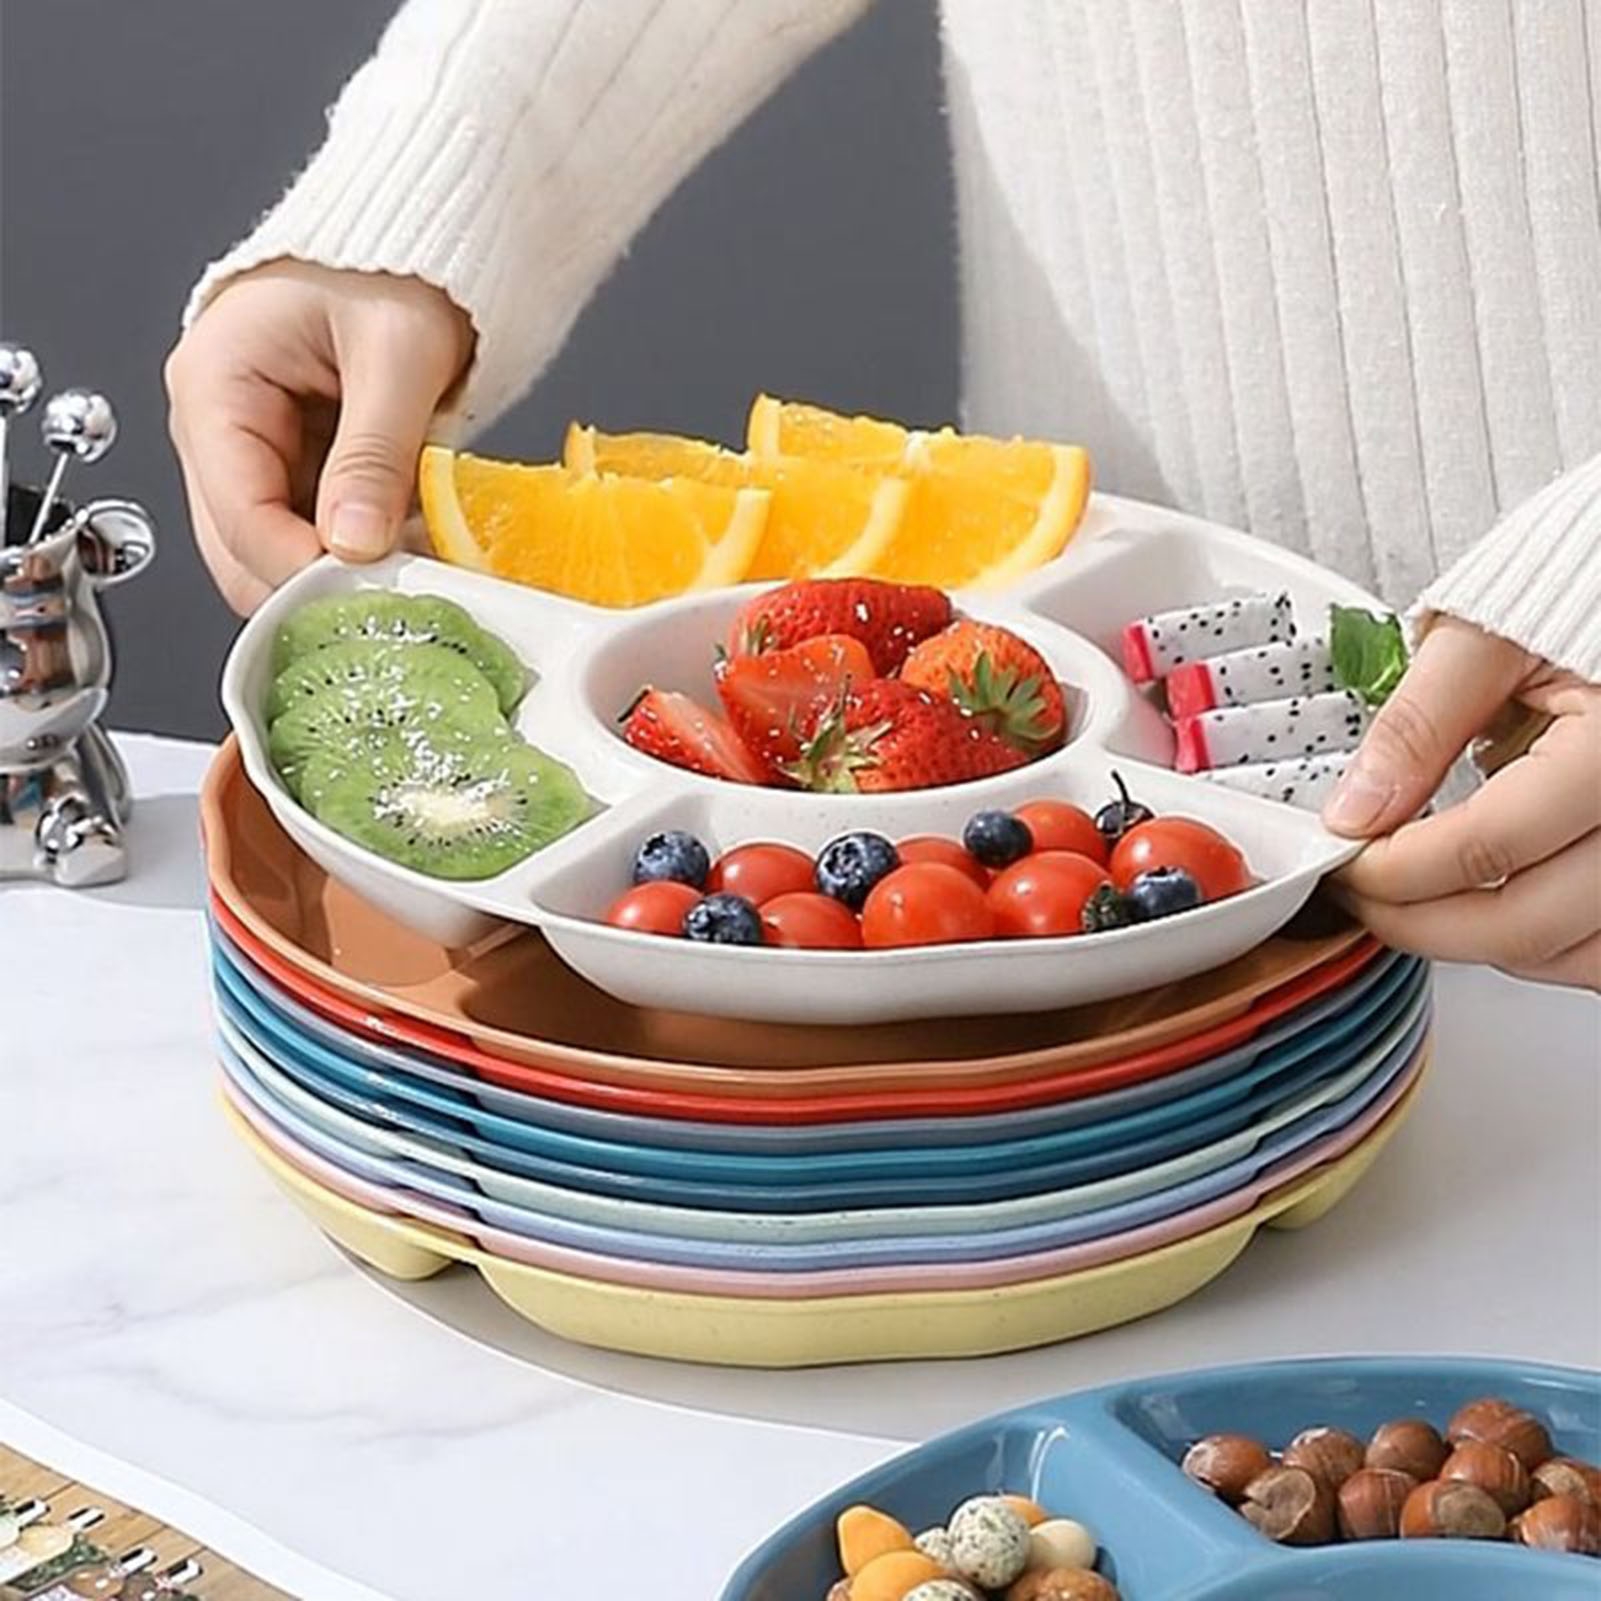 lsiaeian Sectional Platter Divided Serving Dishes Appetizer Serving Trays with 5 Compartments Platter Tray Veggie Tray Chip Dip Tray Divided Snack Trays for Fruit Nut Candy Party - image 5 of 8